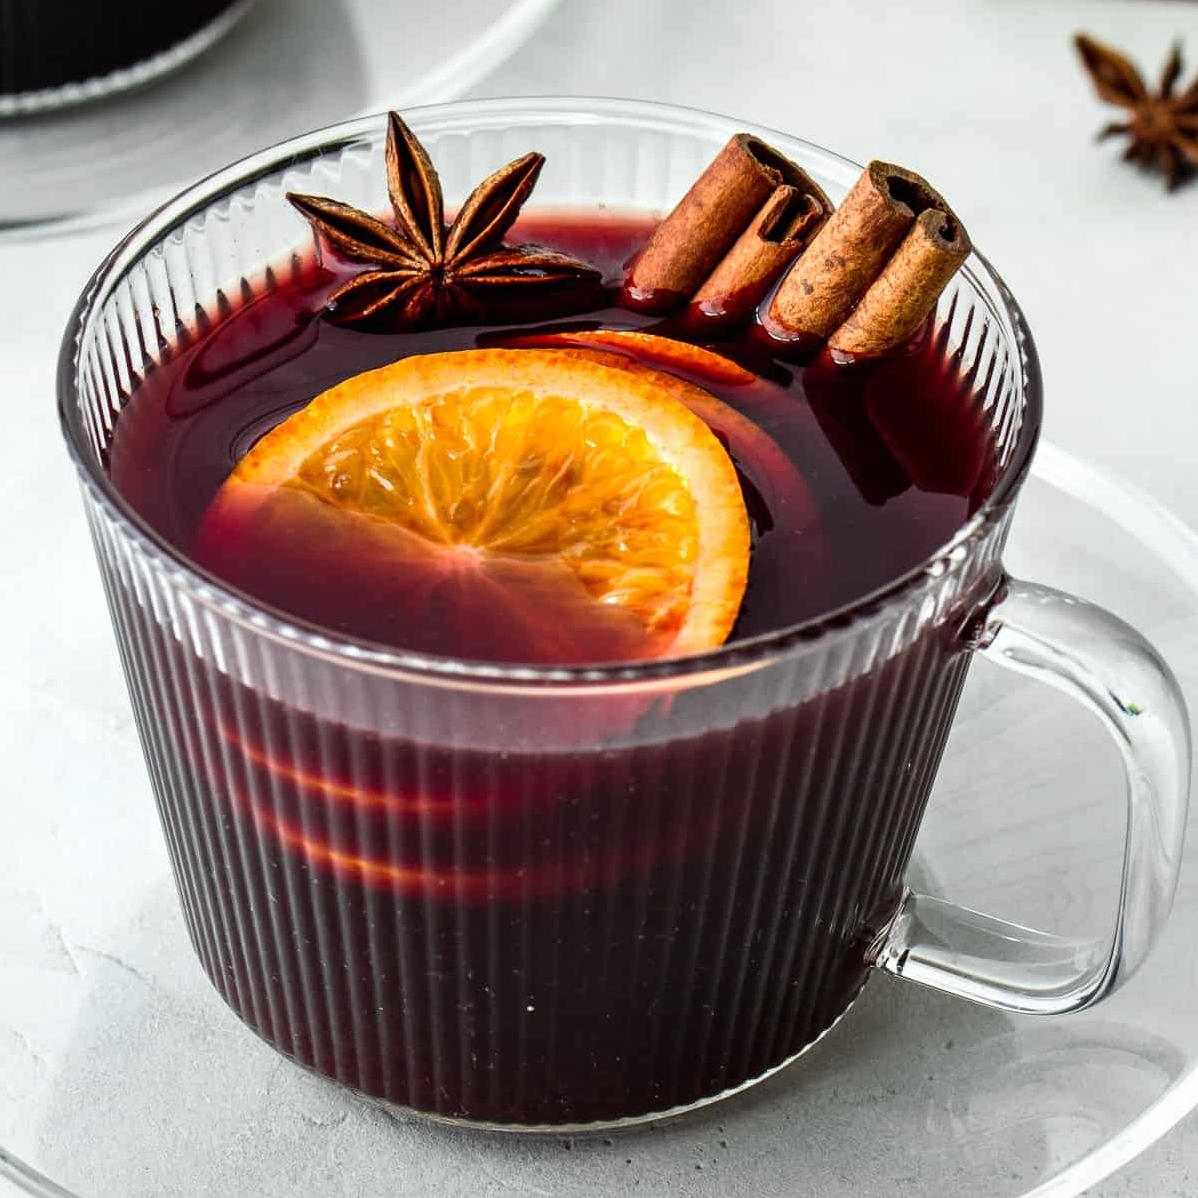  Mulled wine is a cozy drink to serve during the holiday season.